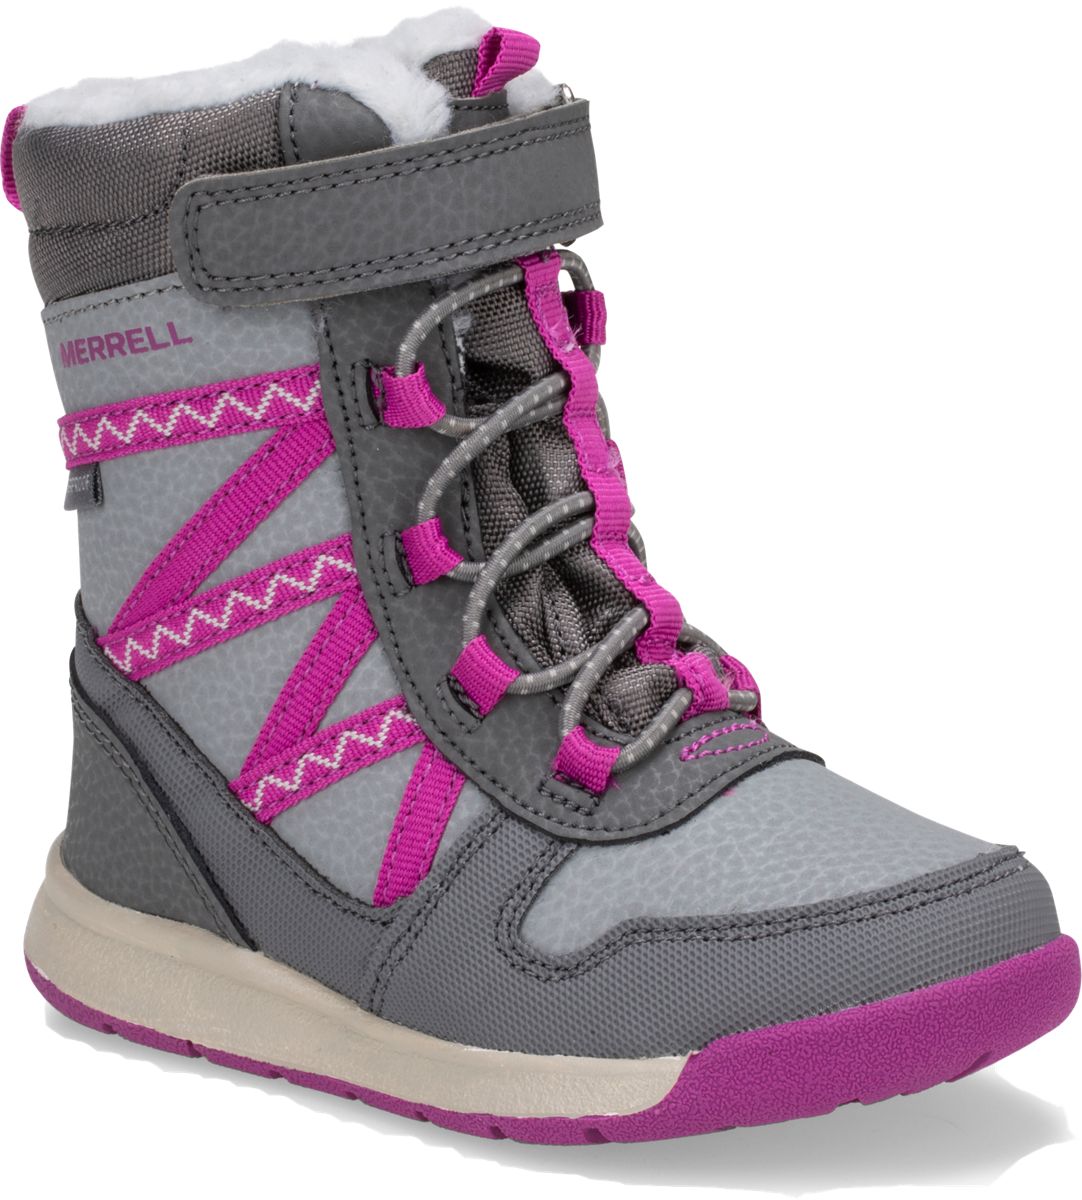 little girls hiking shoes